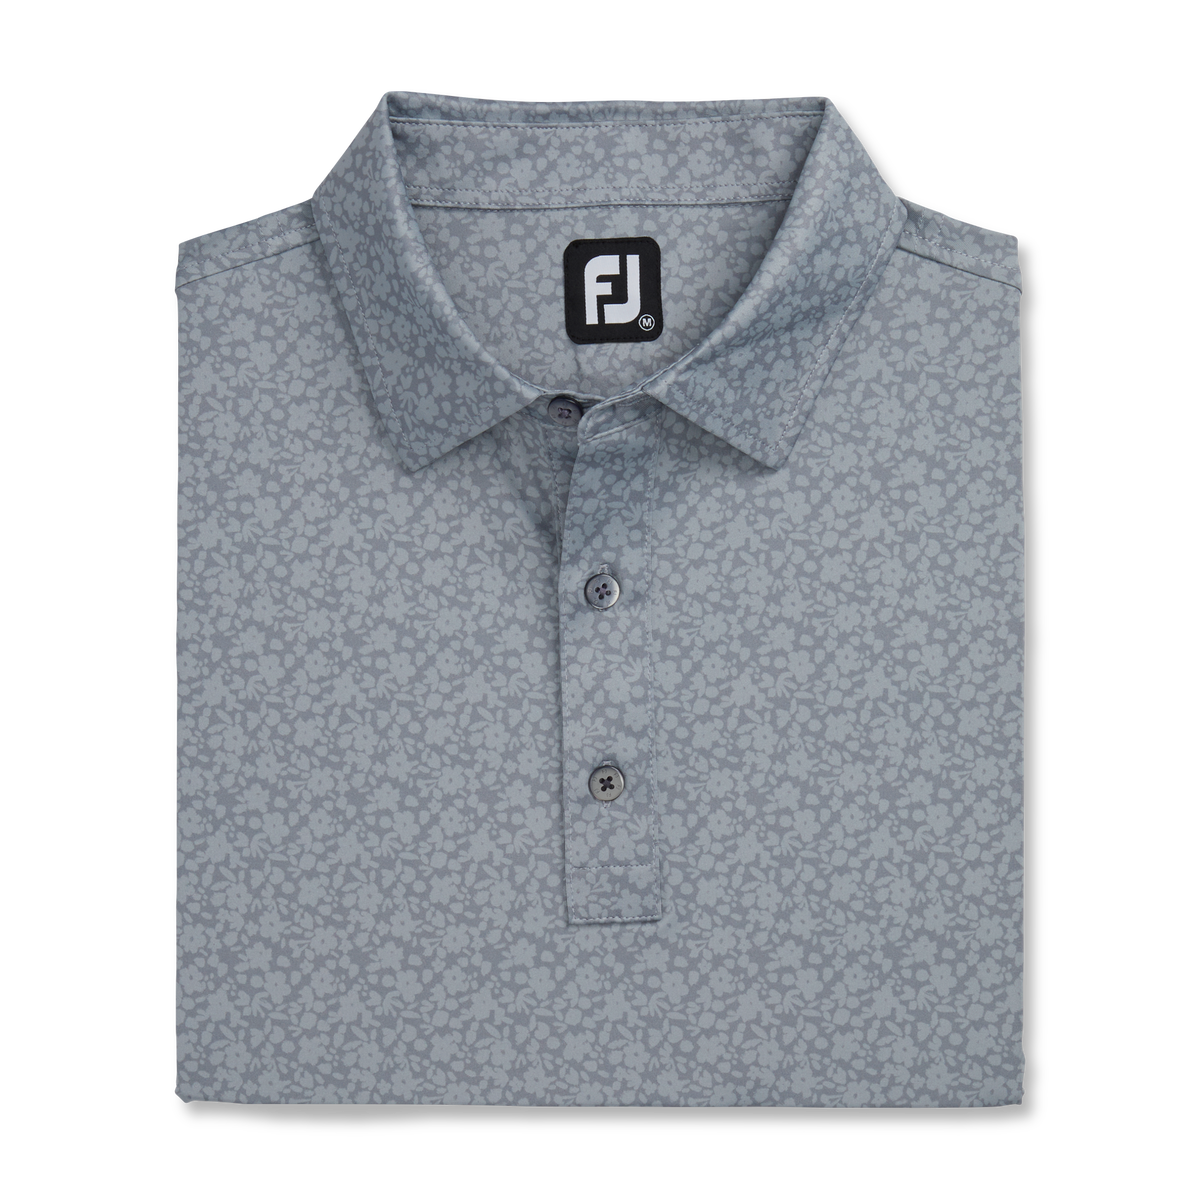 FootJoy: Floral Print with Logo